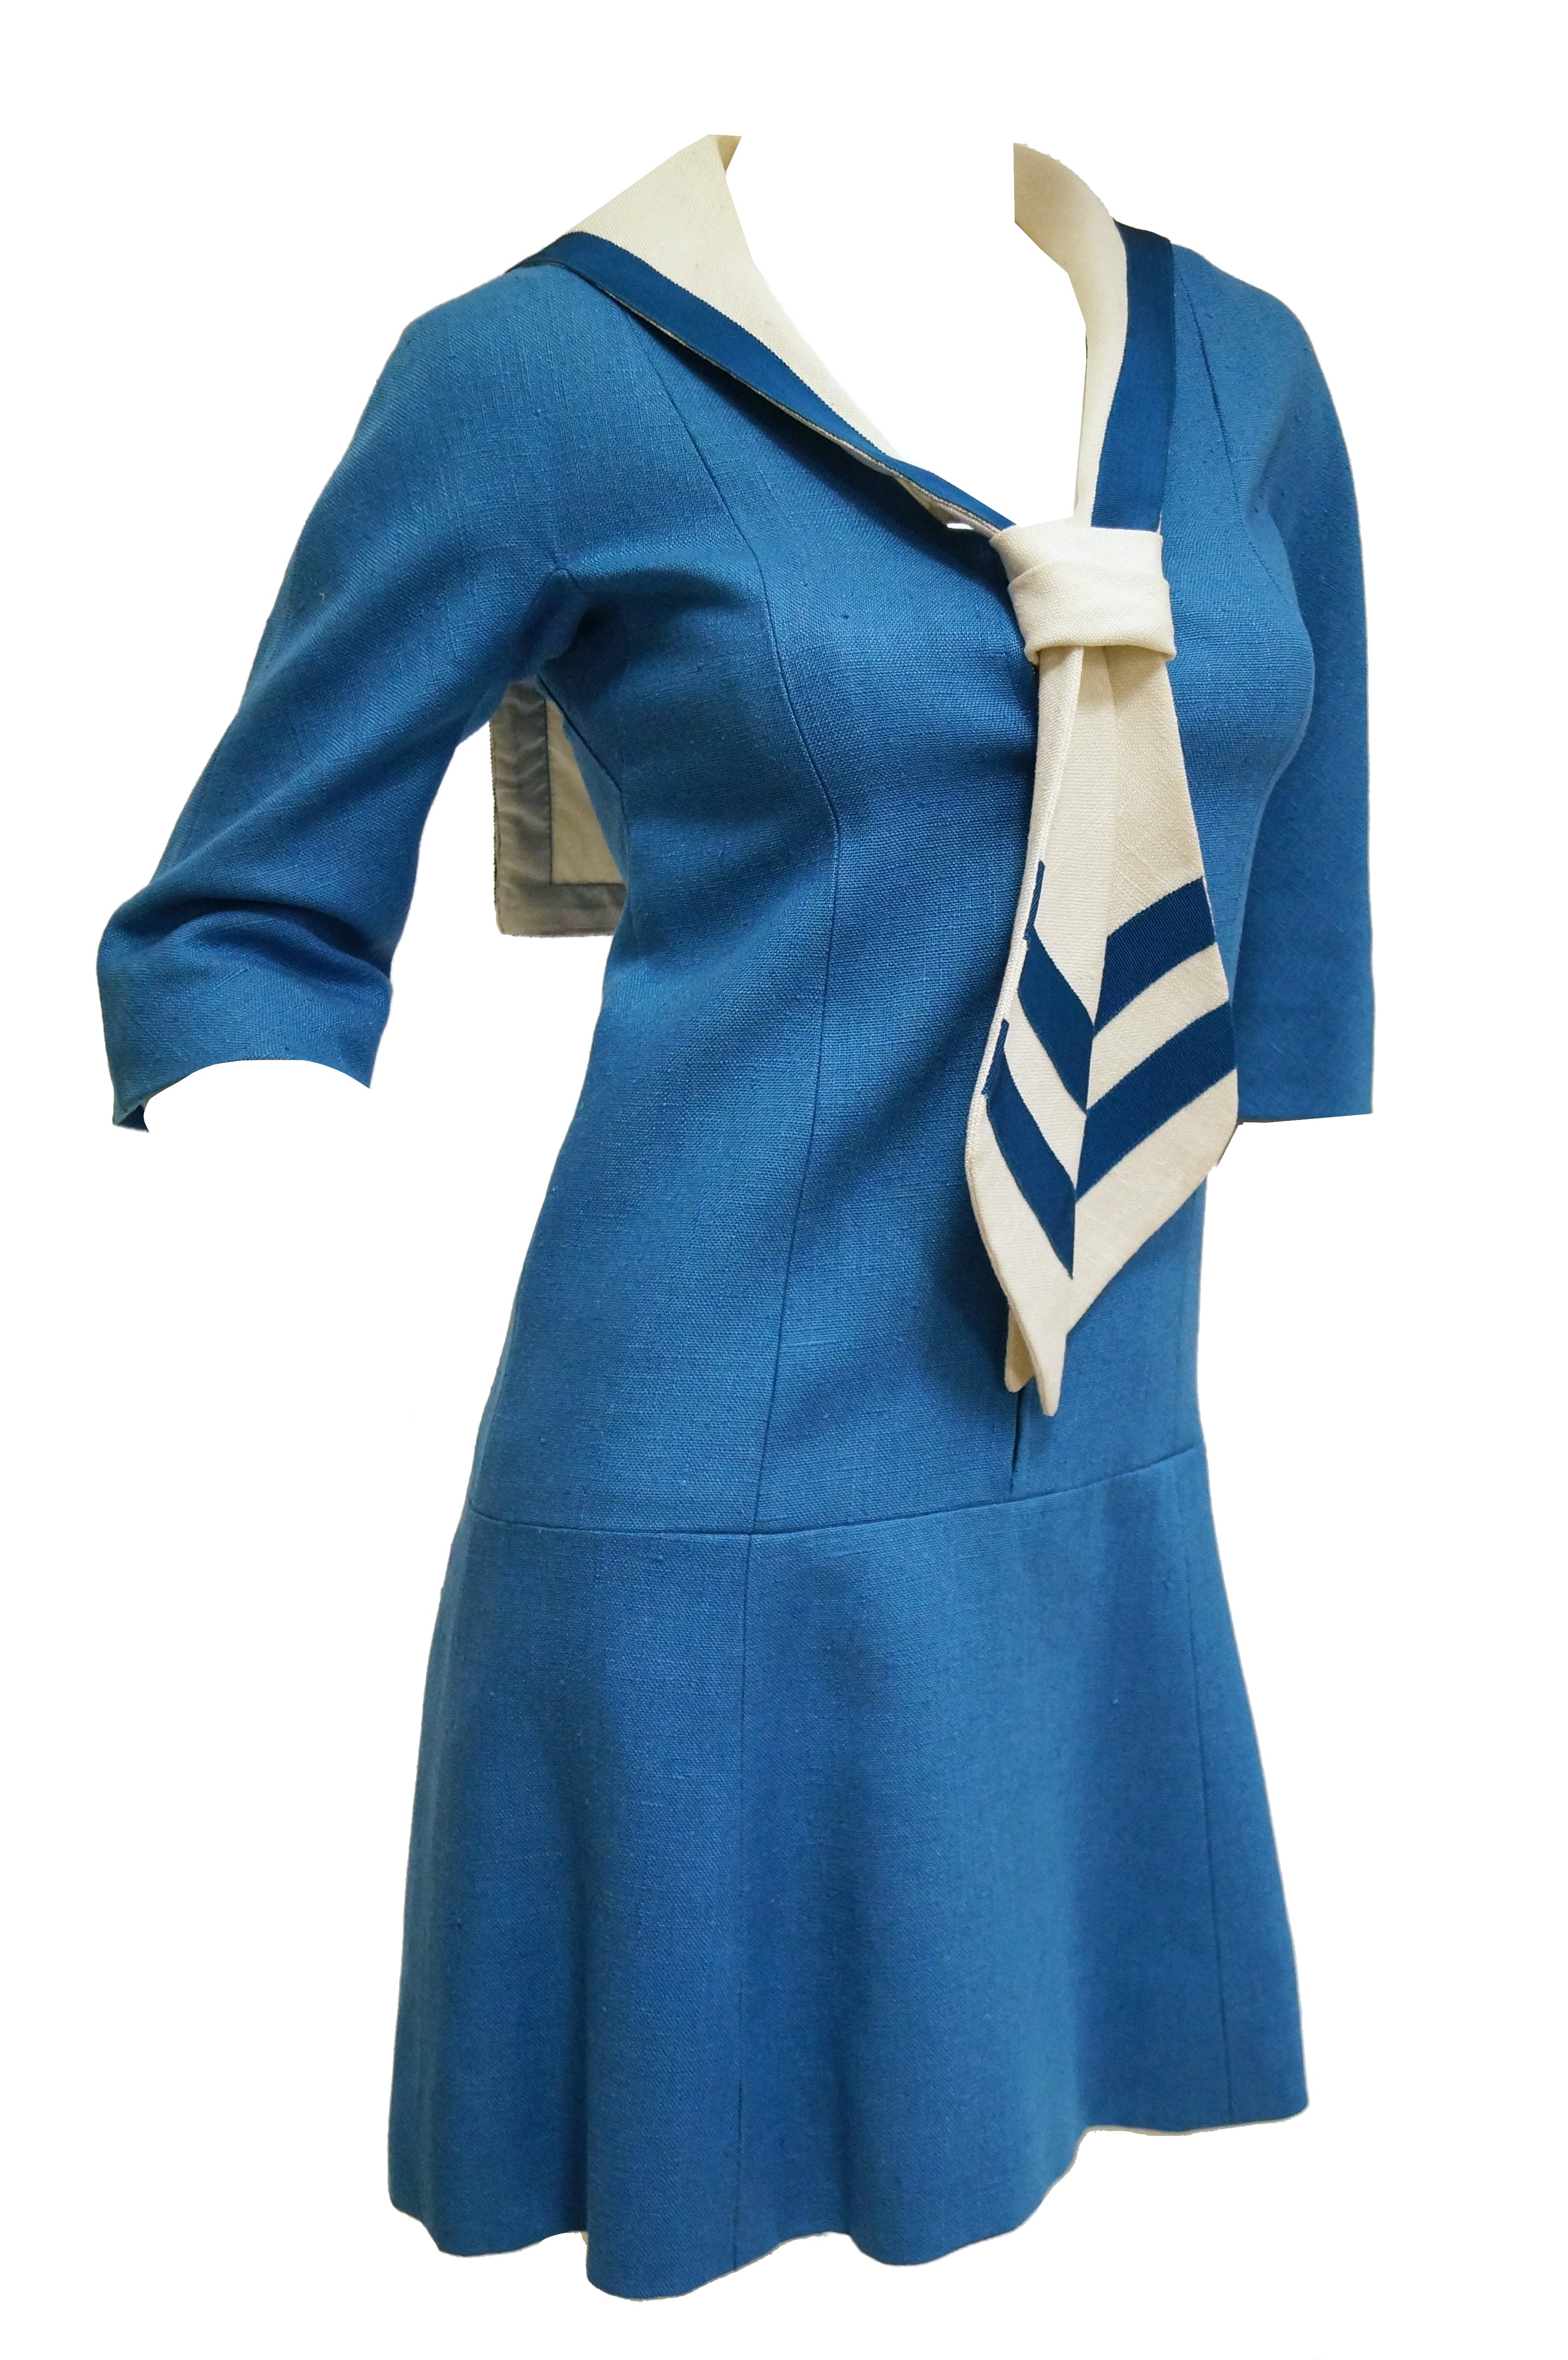 blue and white sailor dress